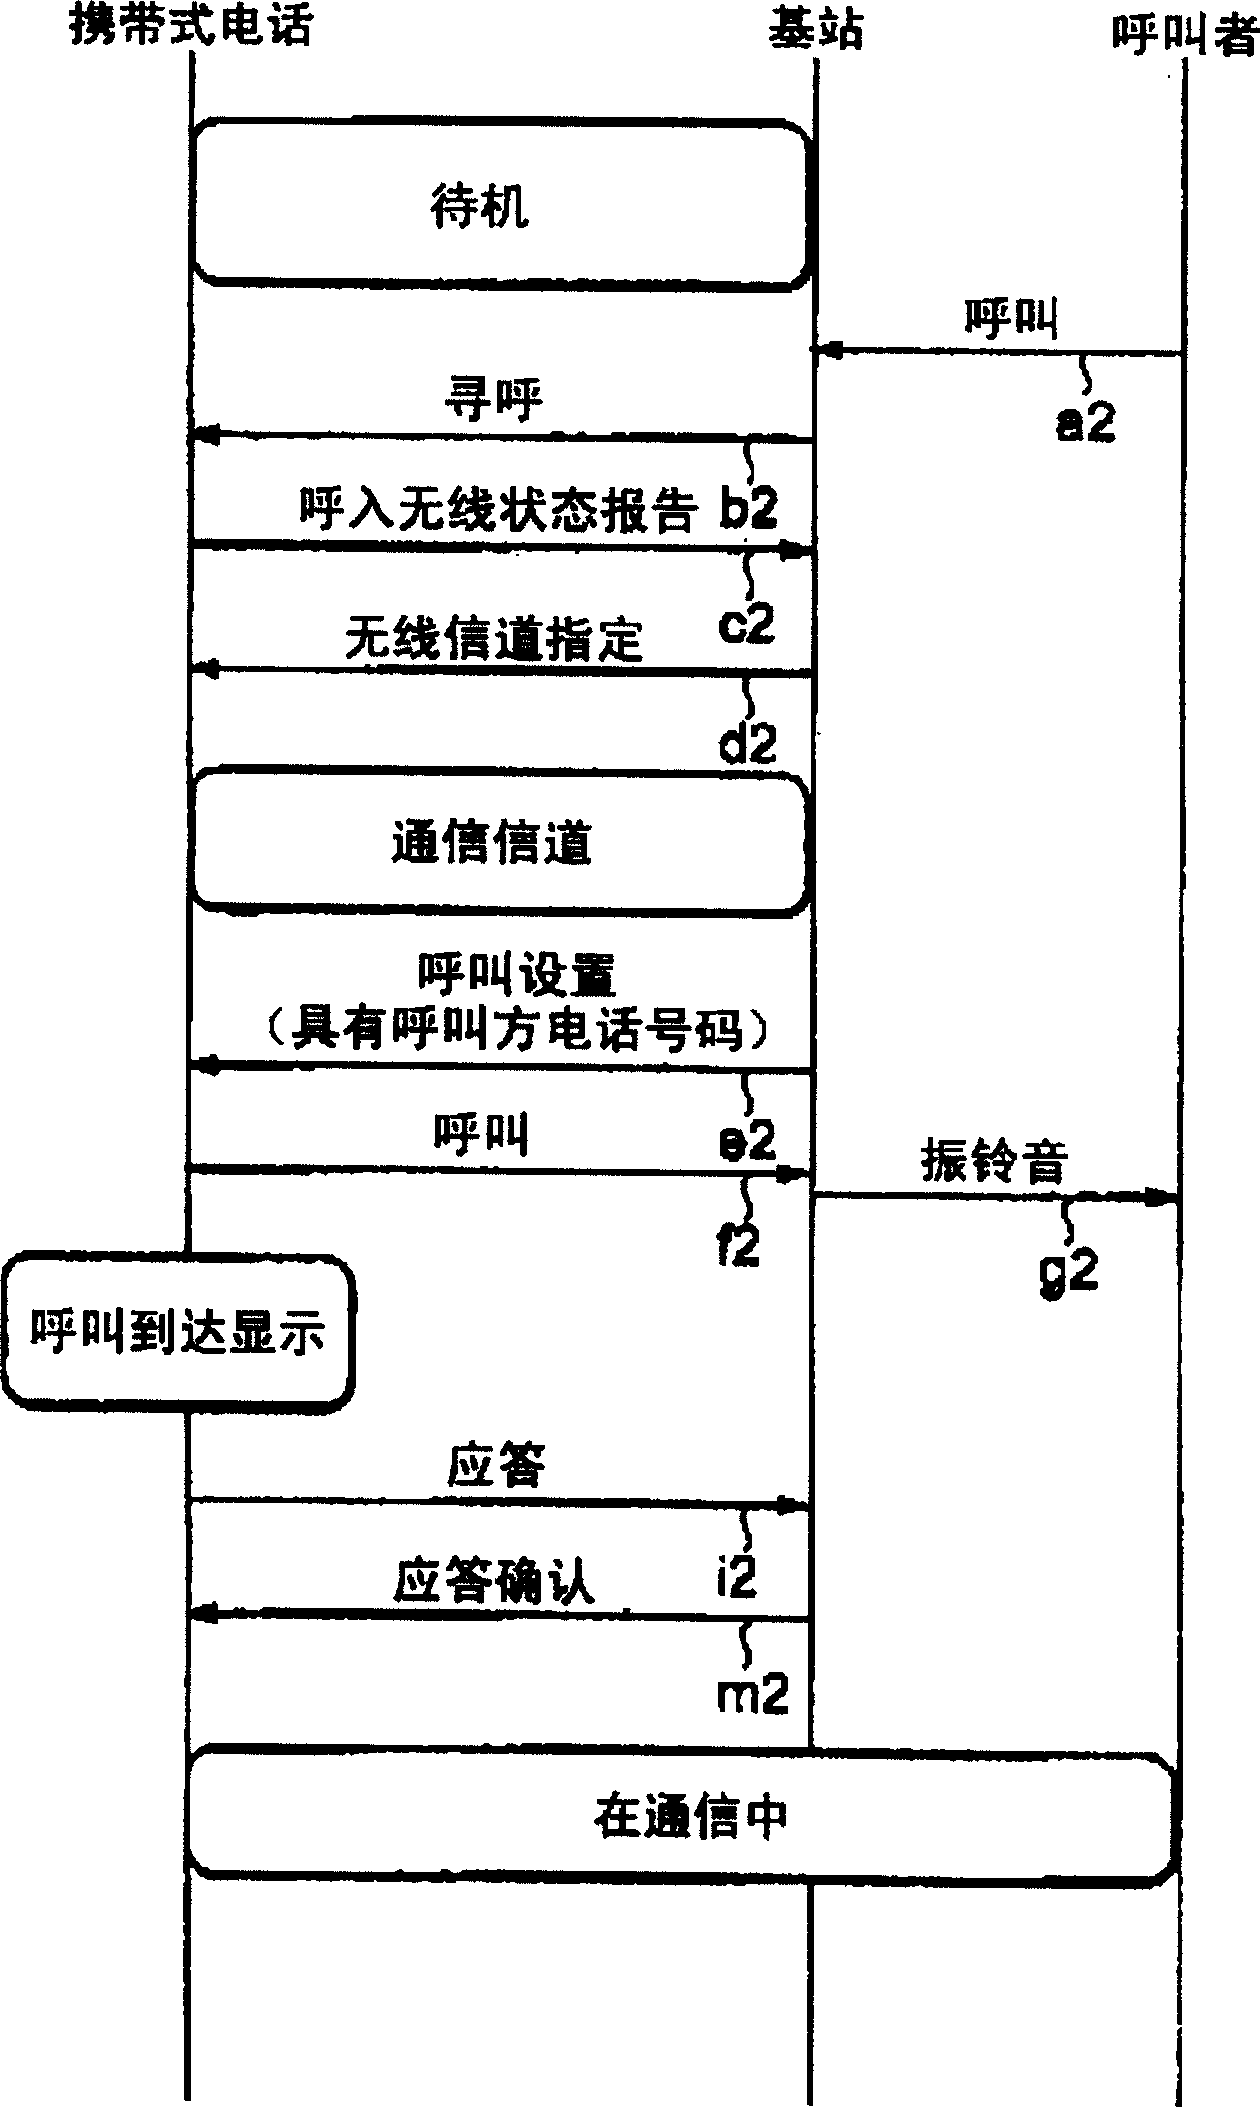 Mobile phone and movable state testing device